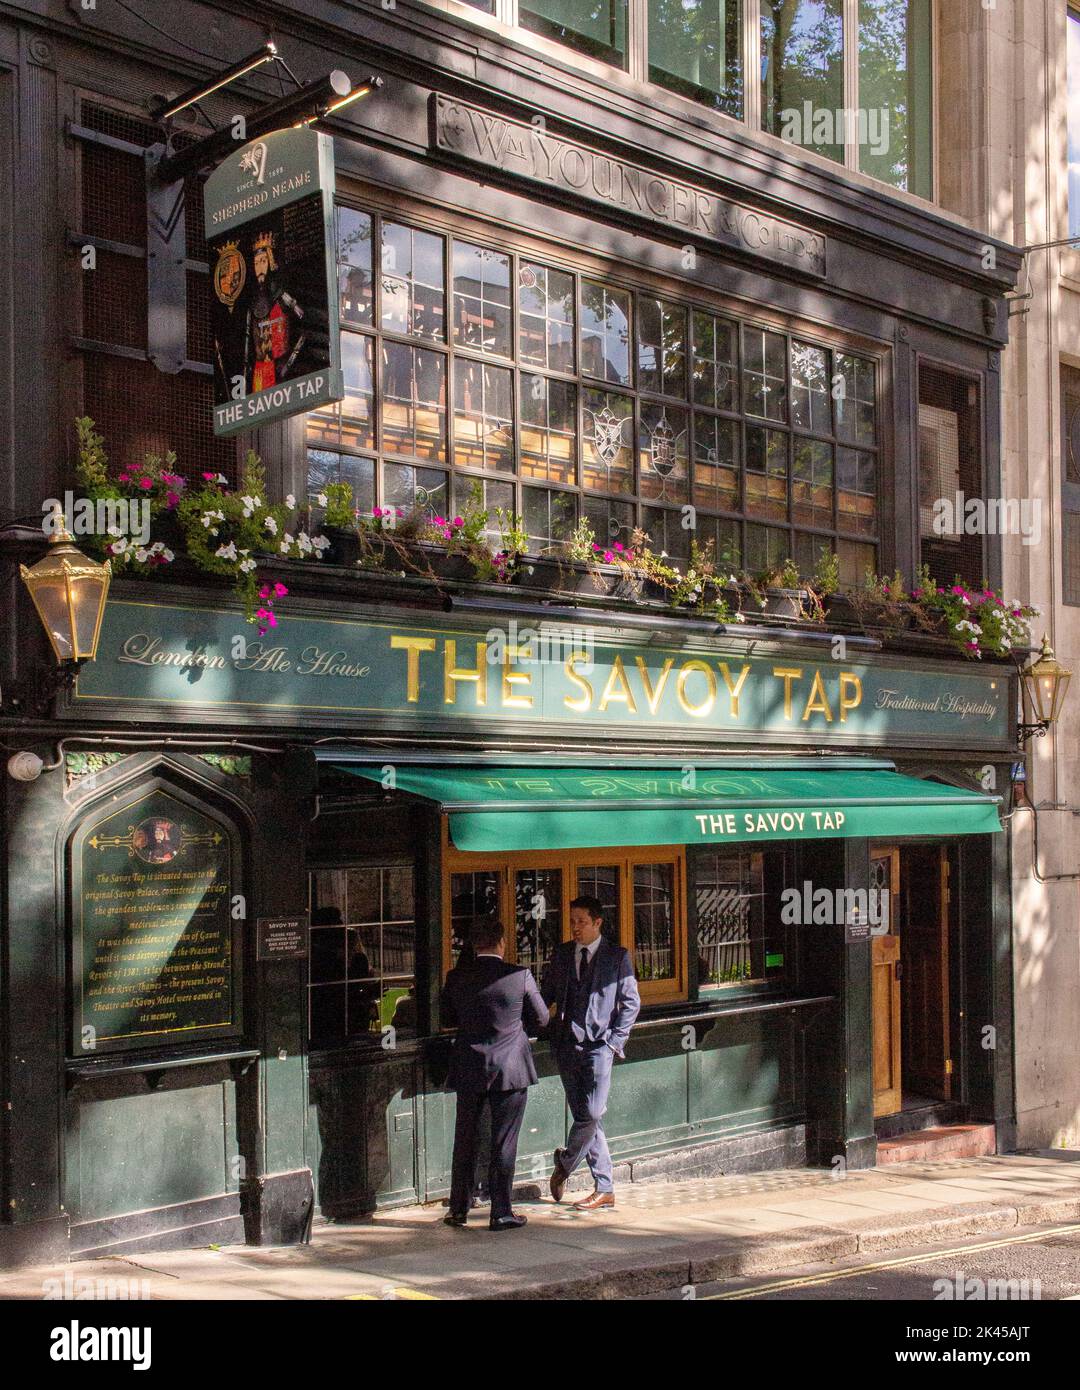 Two young men standing in dappled light and shadows outside The Savoy Tap pub (public house), 2 Savoy St, London Stock Photo